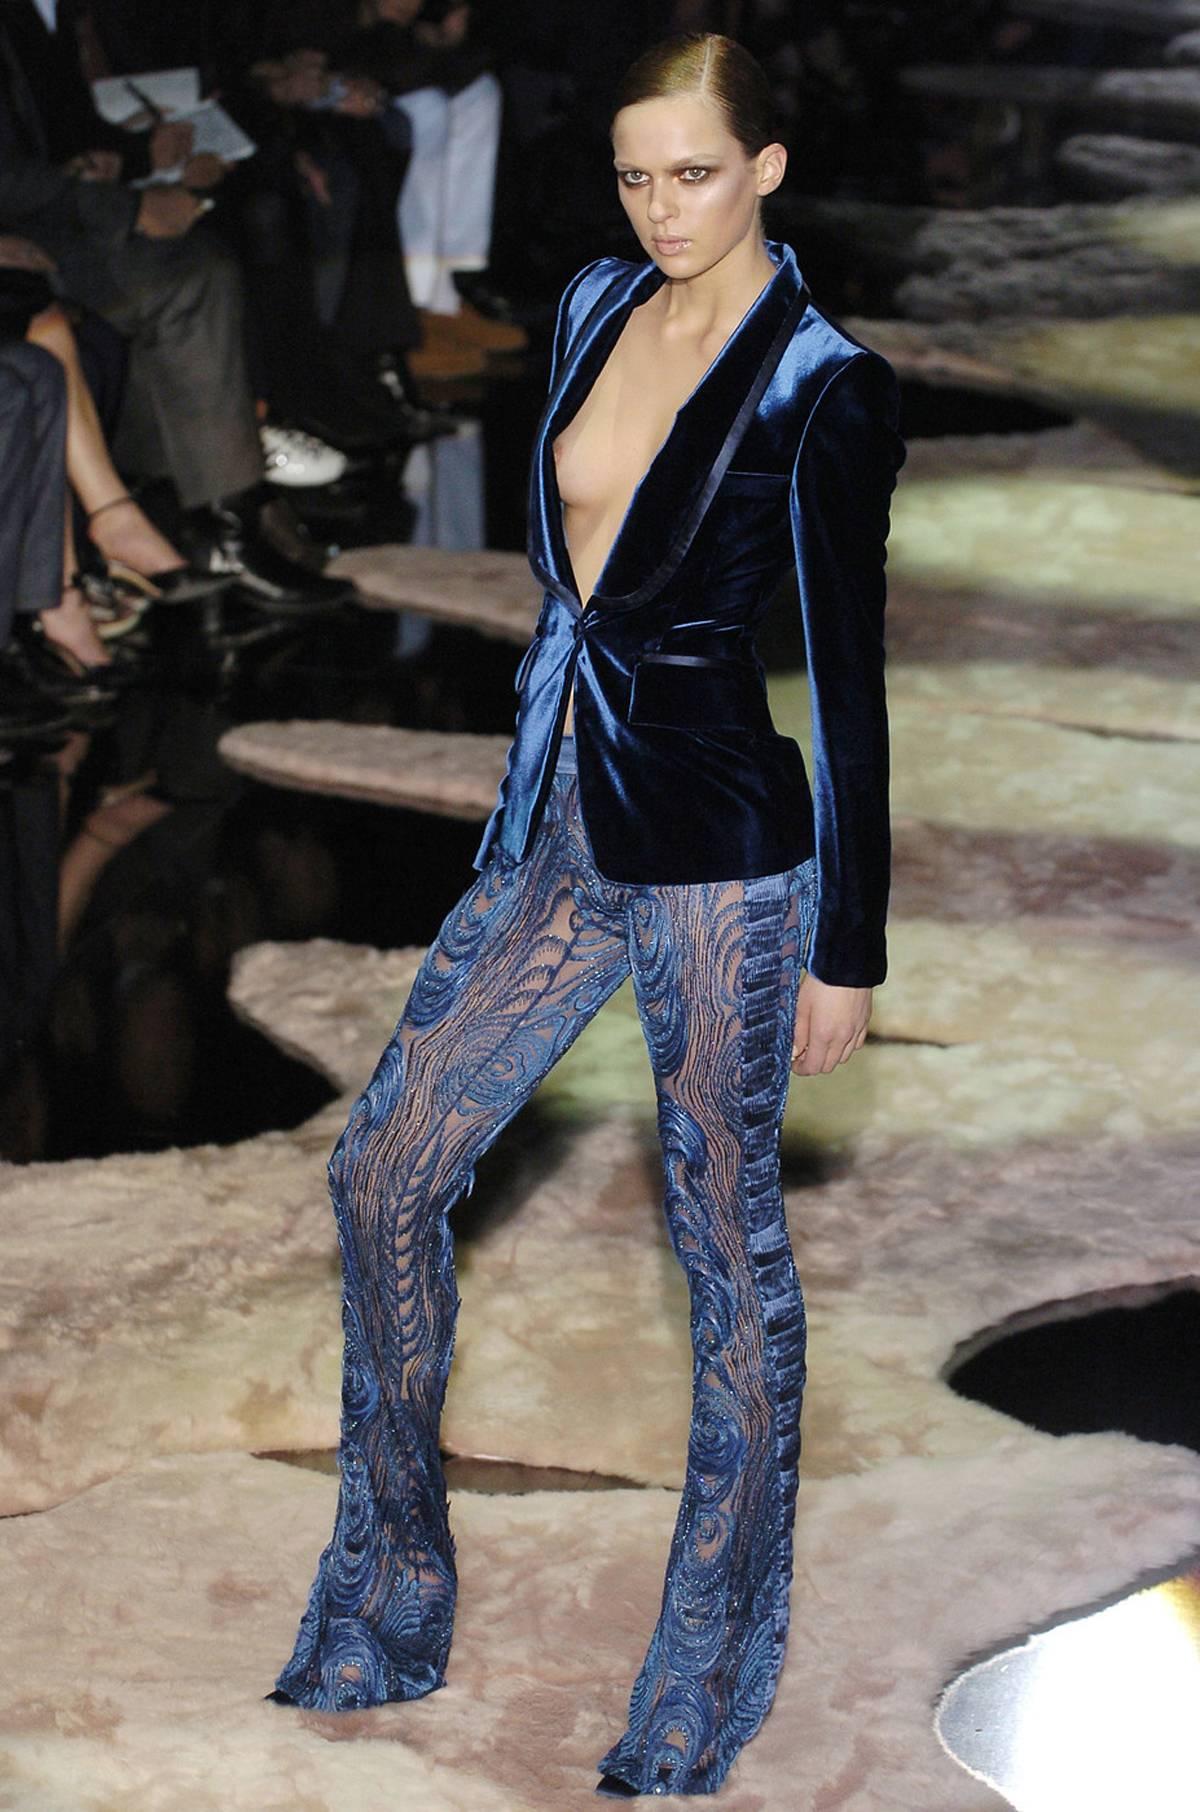 Tom Ford for Gucci Iconic Blue Peacock Feather Sequin Embroidered Lace Pants
F/W 2004 Collection
Italian Size - 40
Fully Beaded, Purple Feather Embellished, Detachable Panties, Stretch.
The same pants that Liberty Ross wore to Tom Ford's